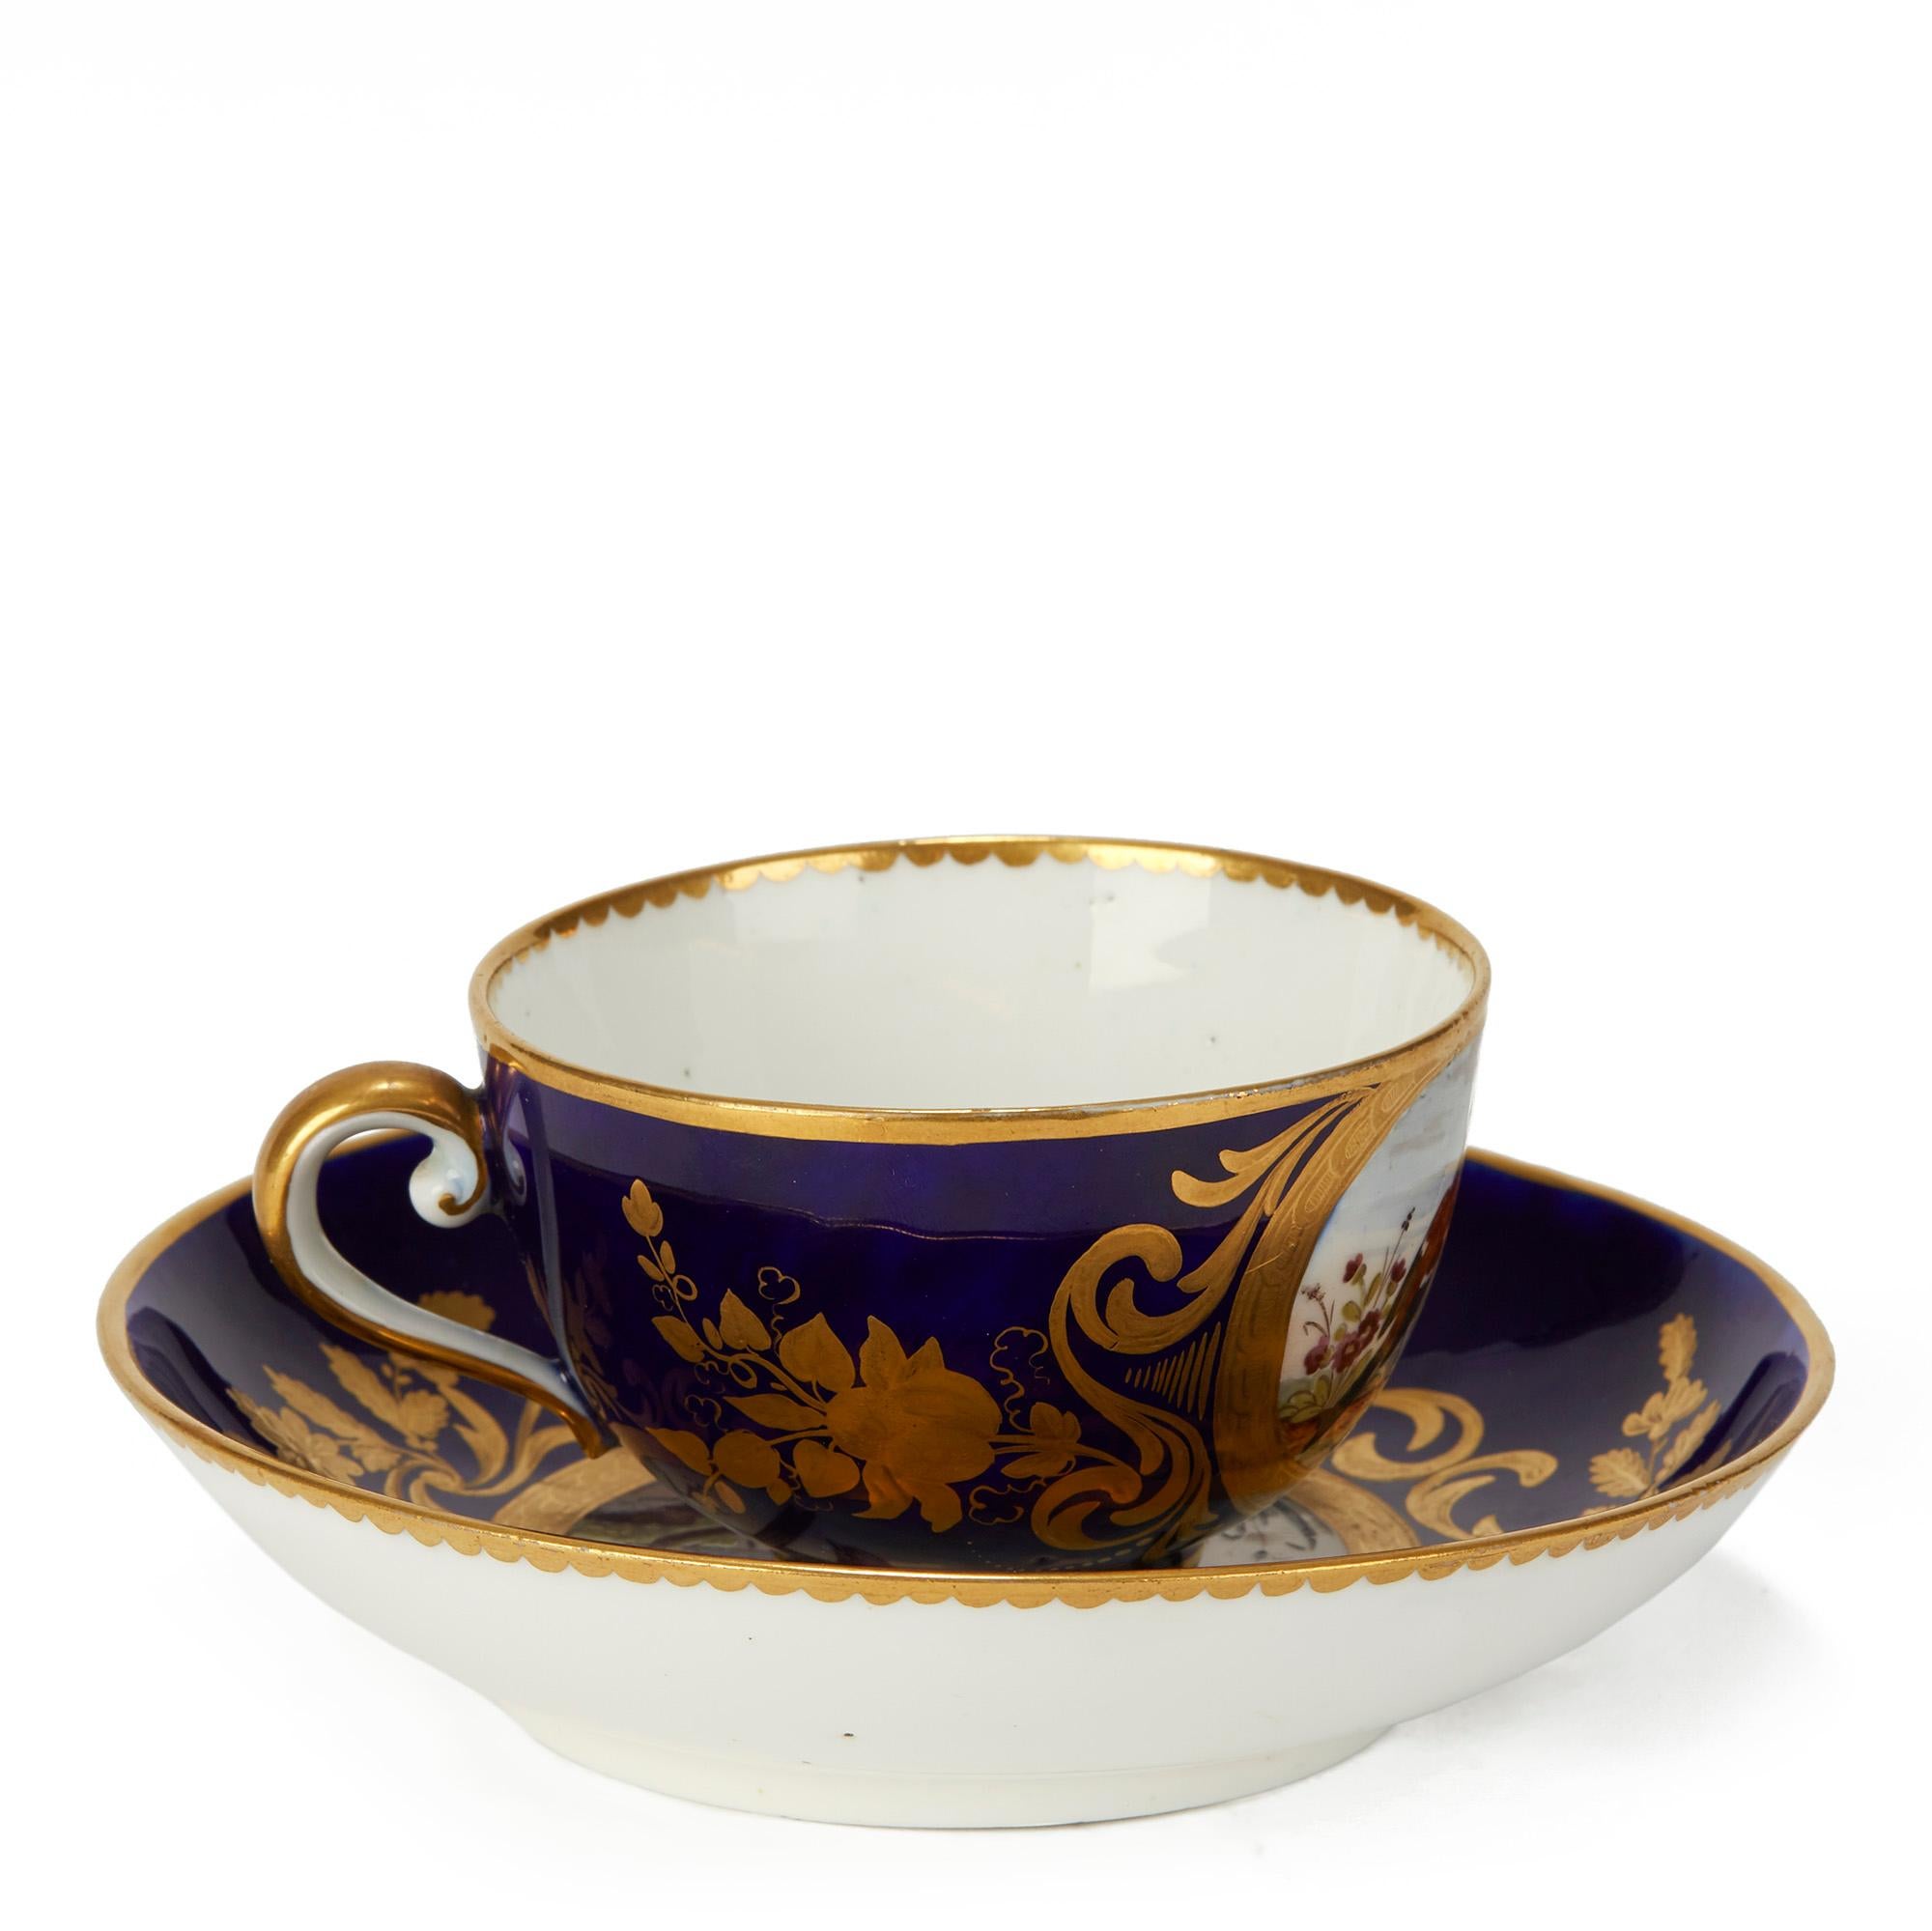 Sèvres French Porcelain Hand Painted Teacup and Saucer with Bird Scenes, 1791 For Sale 3